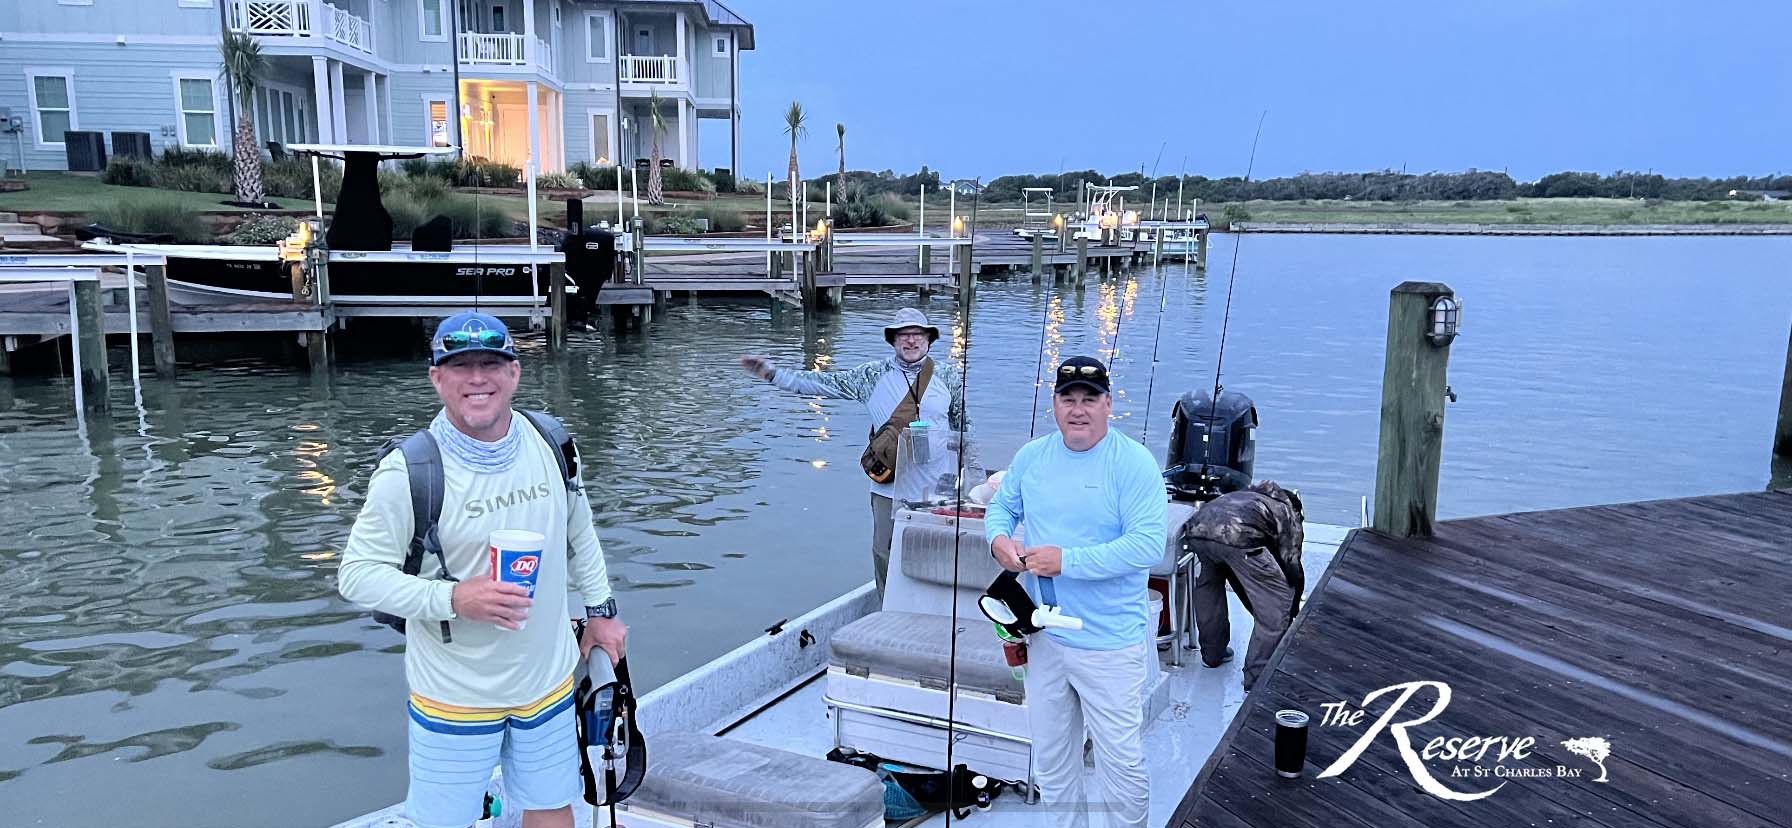 2022 Fishing Tournament At The Reserve At St. Charles Bay